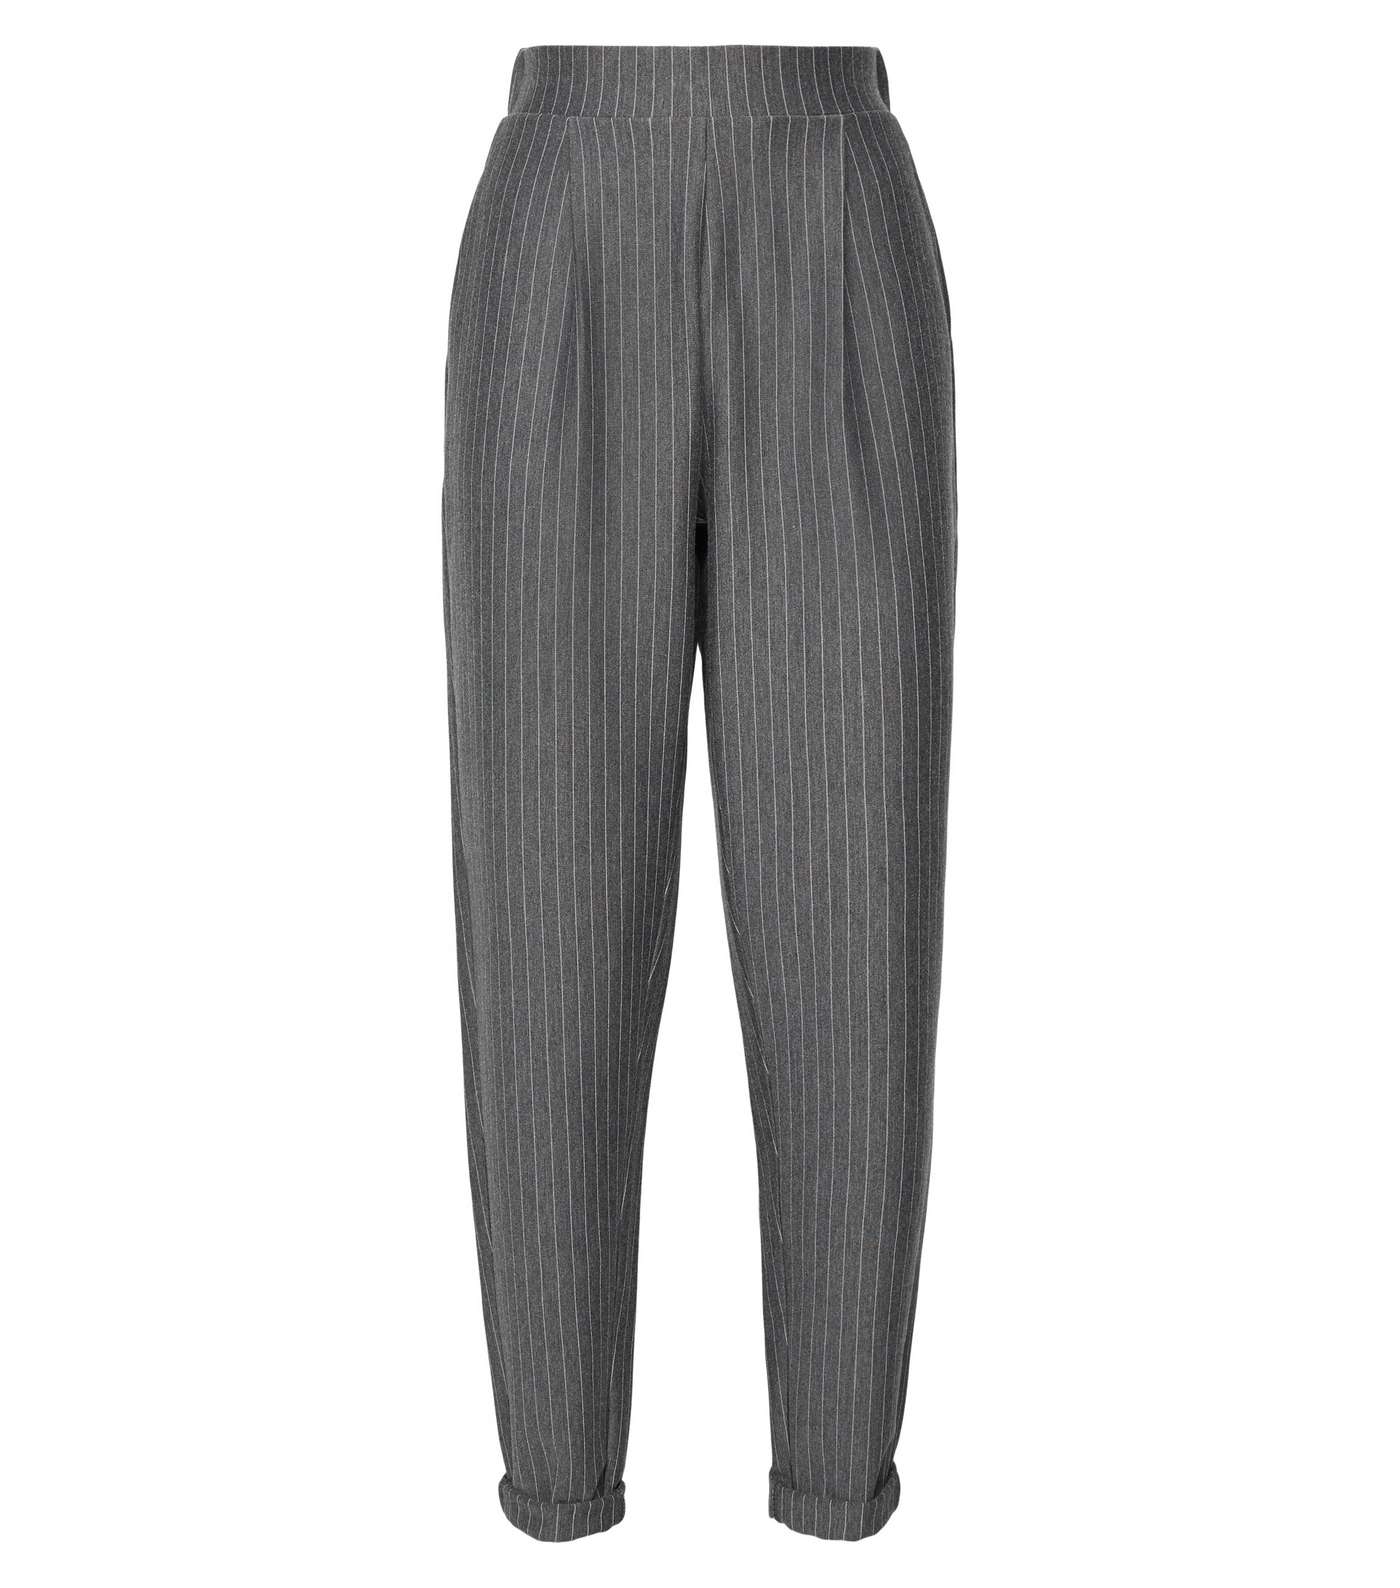 Tall Light Grey Pinstripe Trousers Image 4